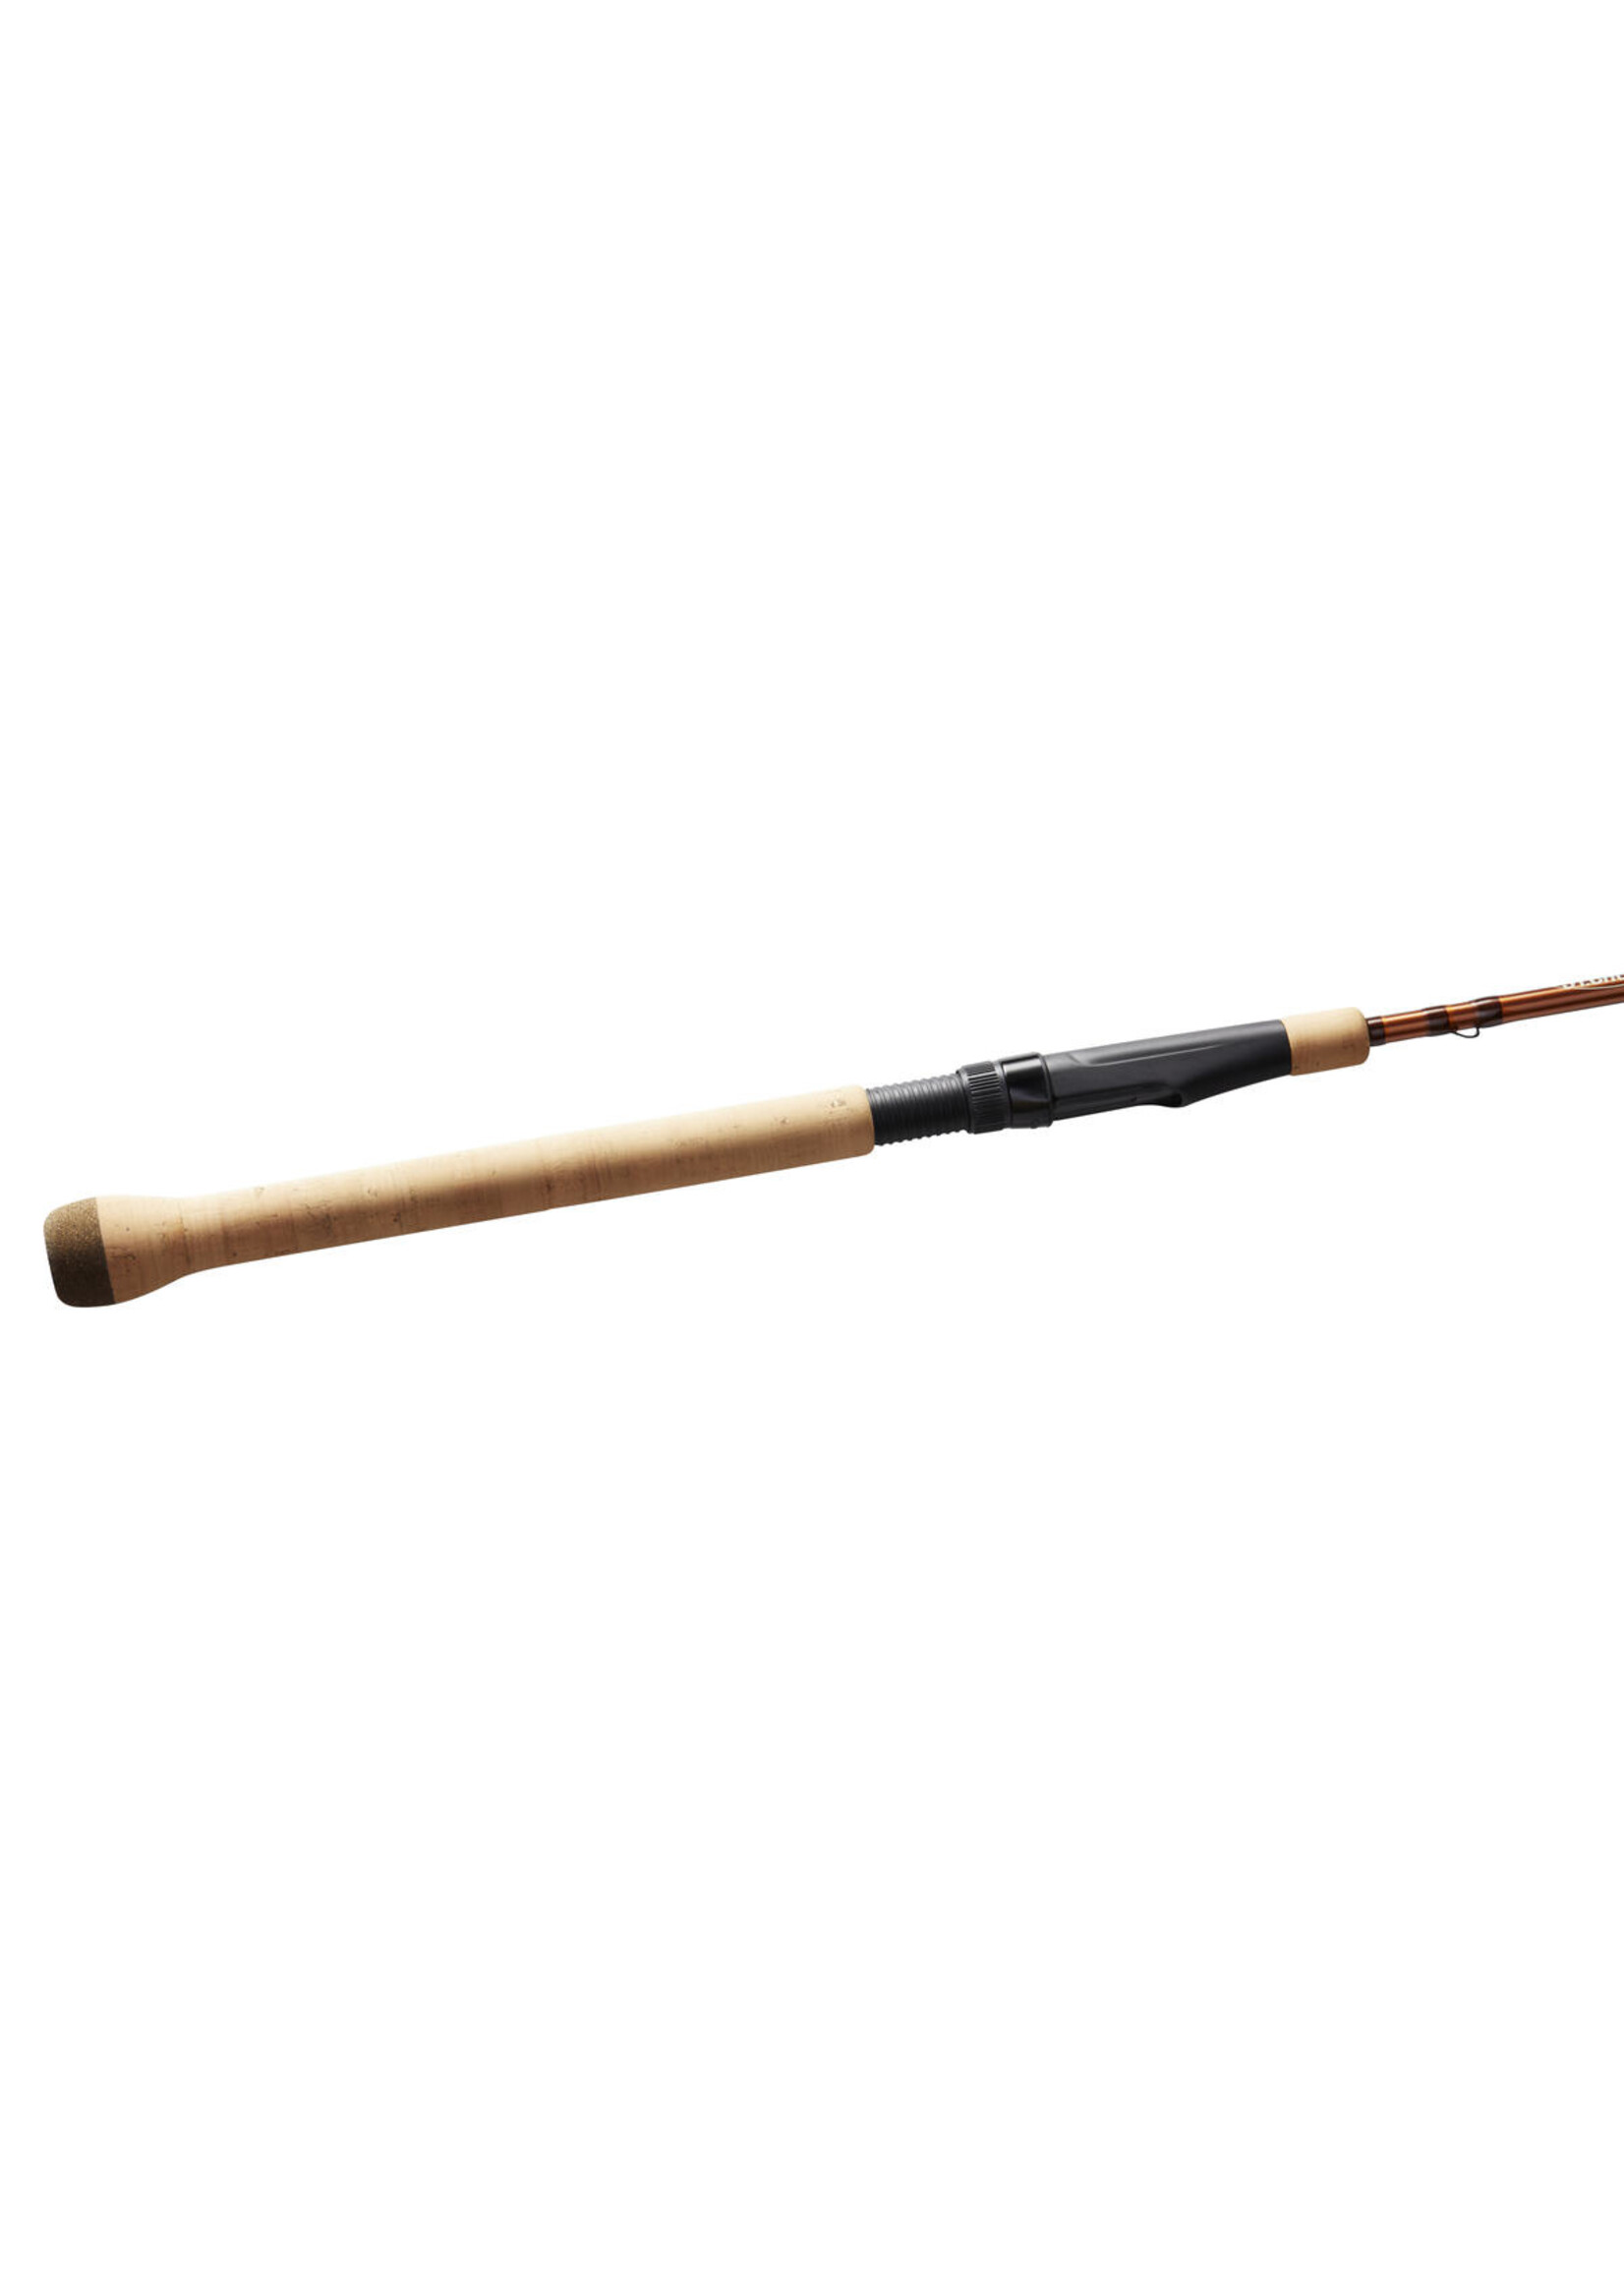 St. Croix Panfish Series Spinning Rods - Tackle Shack